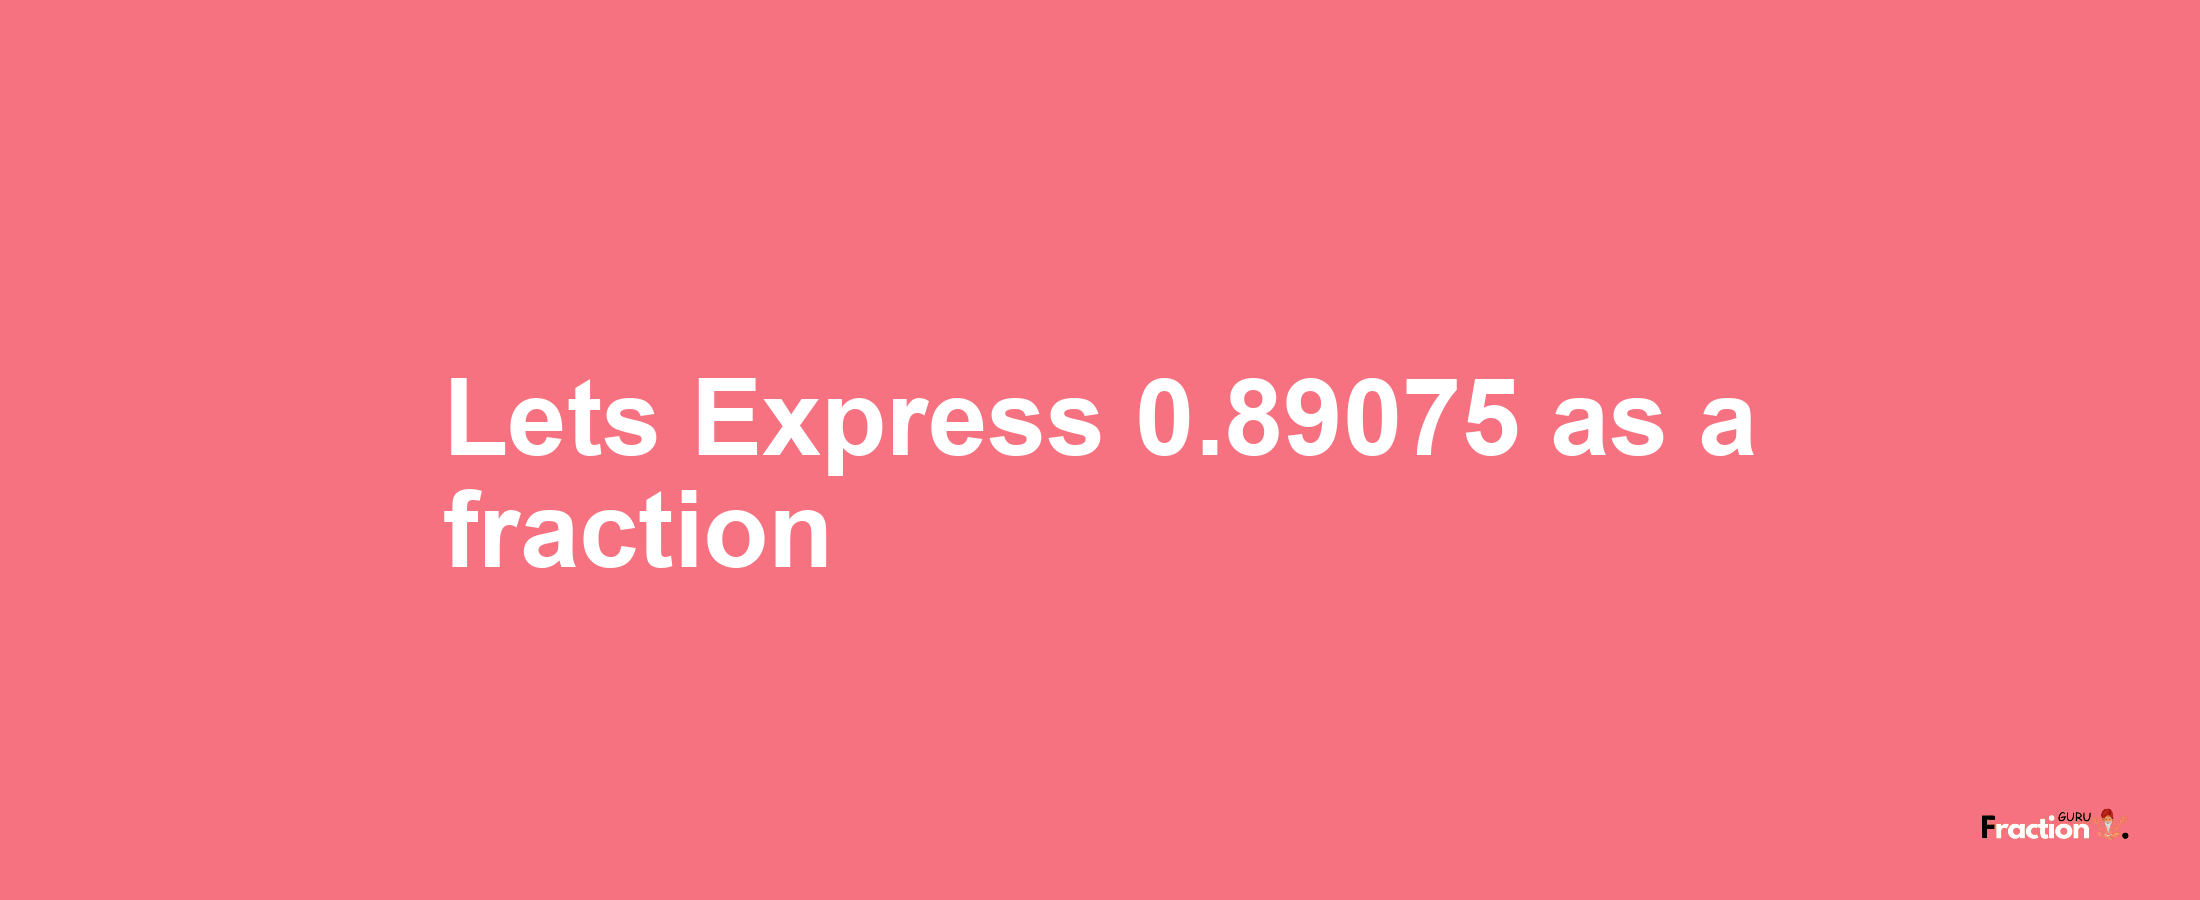 Lets Express 0.89075 as afraction